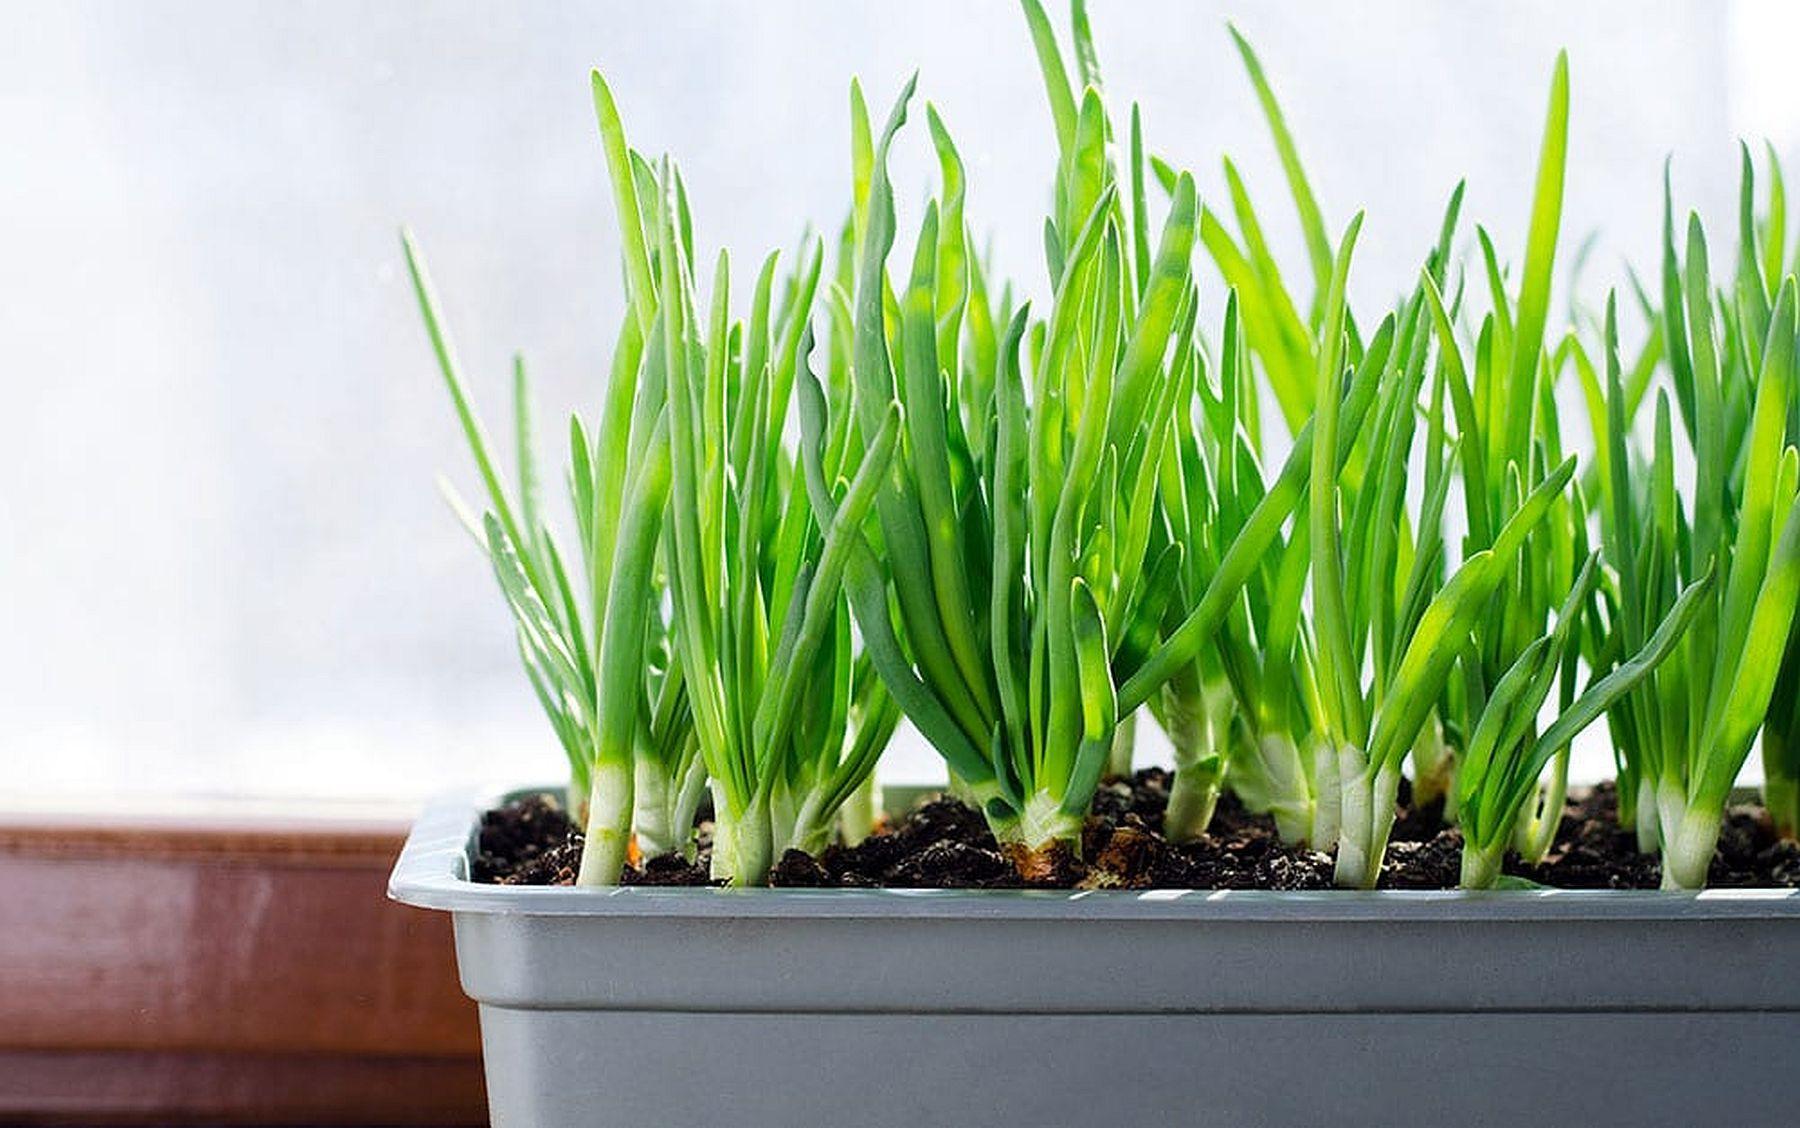 Growth In Gardening Growing Green Onions San Marcos Record,Cellulose In Food Definition